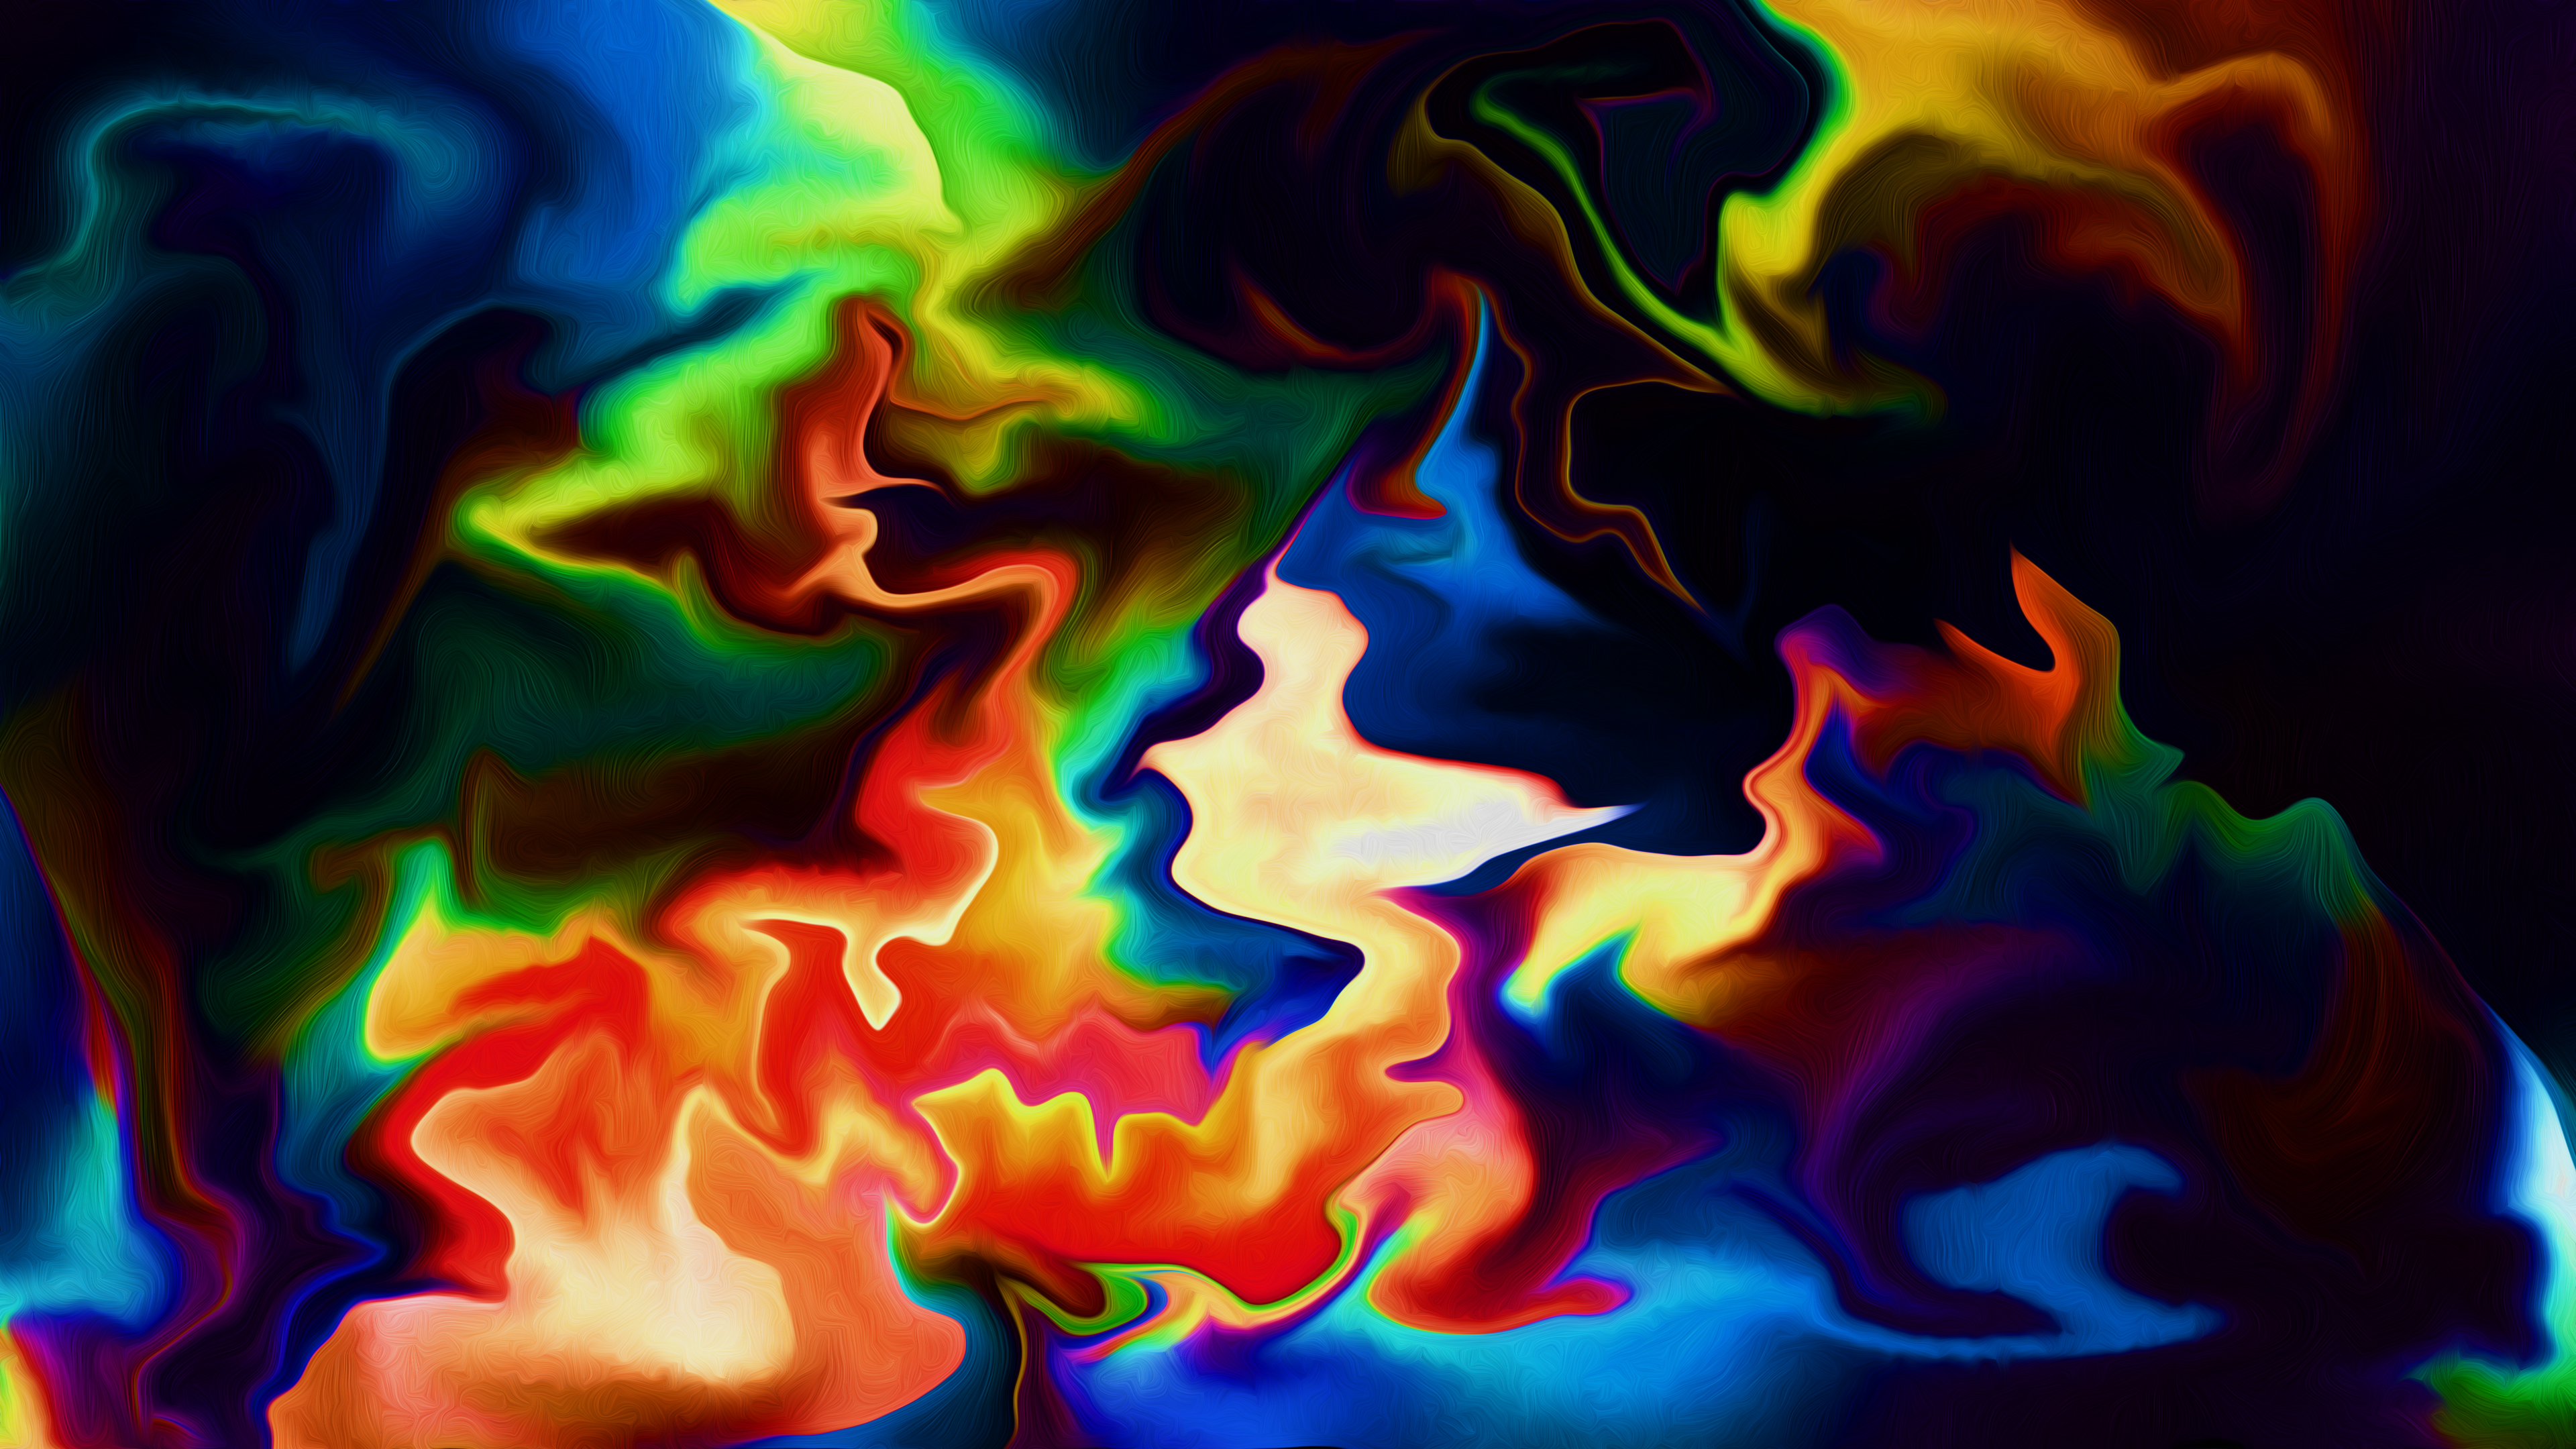 Abstract Fluid Liquid Colorful Interference 3840x2160